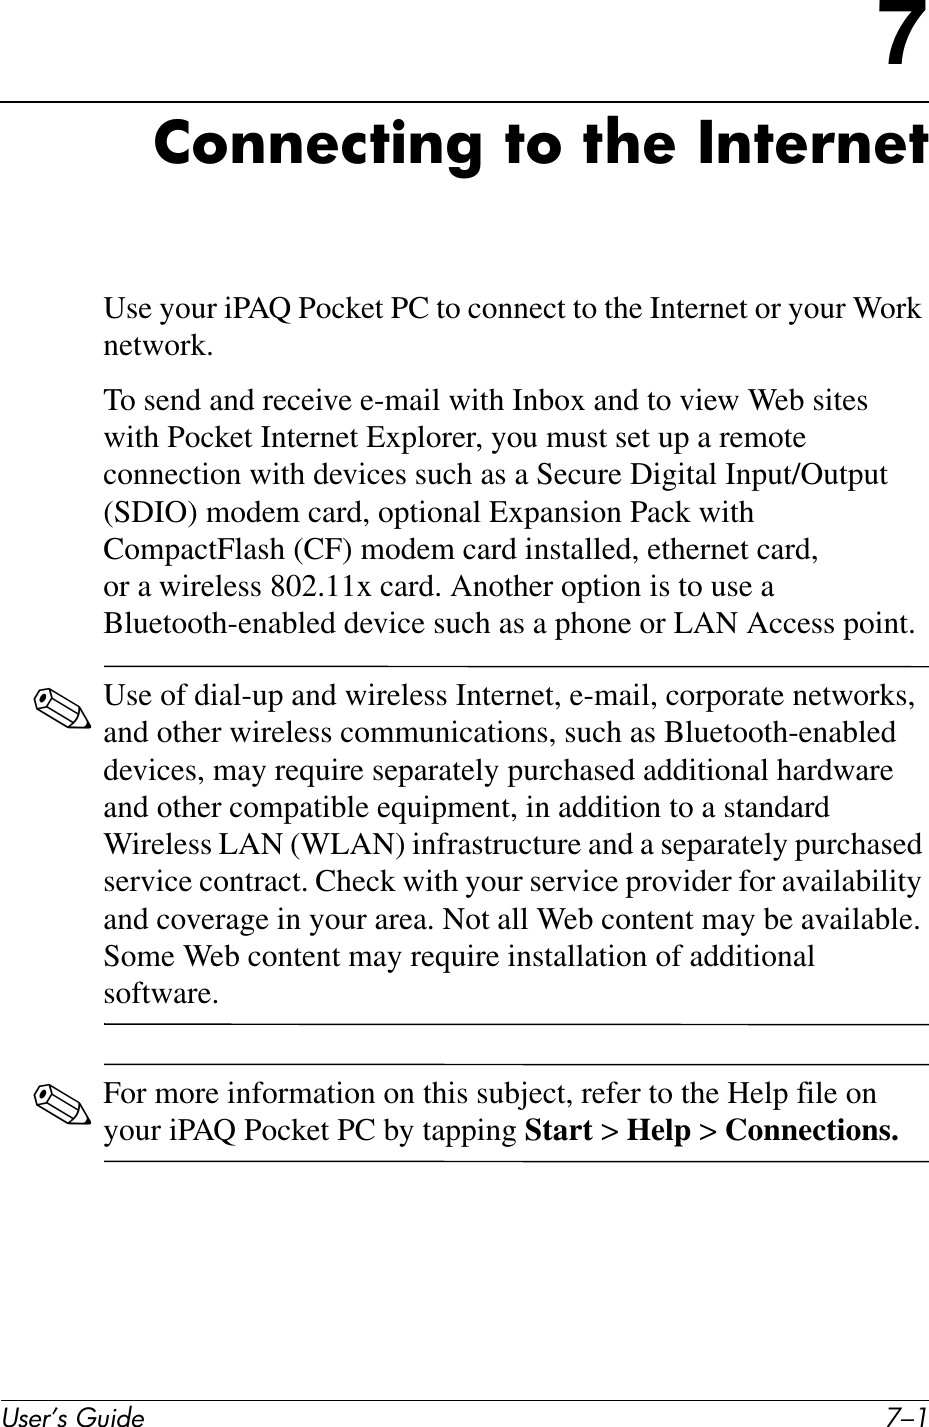 User’s Guide 7–17Connecting to the InternetUse your iPAQ Pocket PC to connect to the Internet or your Work network.To send and receive e-mail with Inbox and to view Web sites with Pocket Internet Explorer, you must set up a remote connection with devices such as a Secure Digital Input/Output (SDIO) modem card, optional Expansion Pack with CompactFlash (CF) modem card installed, ethernet card, or a wireless 802.11x card. Another option is to use a Bluetooth-enabled device such as a phone or LAN Access point. ✎Use of dial-up and wireless Internet, e-mail, corporate networks, and other wireless communications, such as Bluetooth-enabled devices, may require separately purchased additional hardware and other compatible equipment, in addition to a standard Wireless LAN (WLAN) infrastructure and a separately purchased service contract. Check with your service provider for availability and coverage in your area. Not all Web content may be available. Some Web content may require installation of additional software.✎For more information on this subject, refer to the Help file on your iPAQ Pocket PC by tapping Start &gt; Help &gt; Connections.